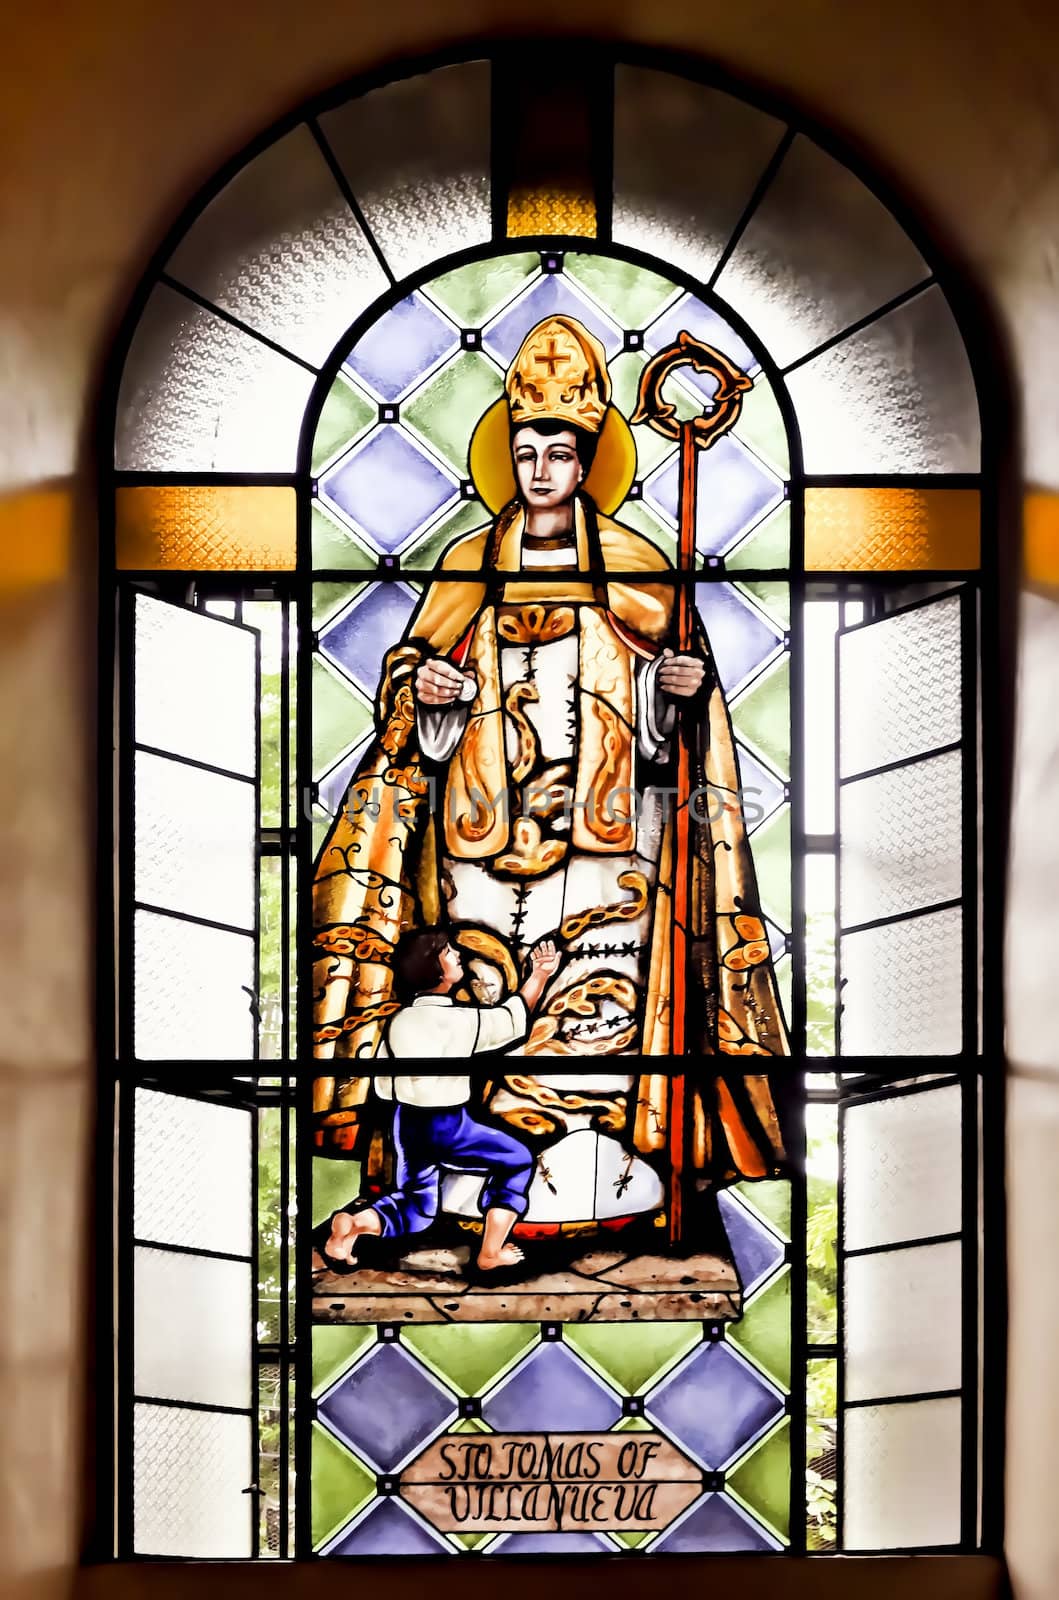 Stained glass depicting St. Tomas of Villanueva